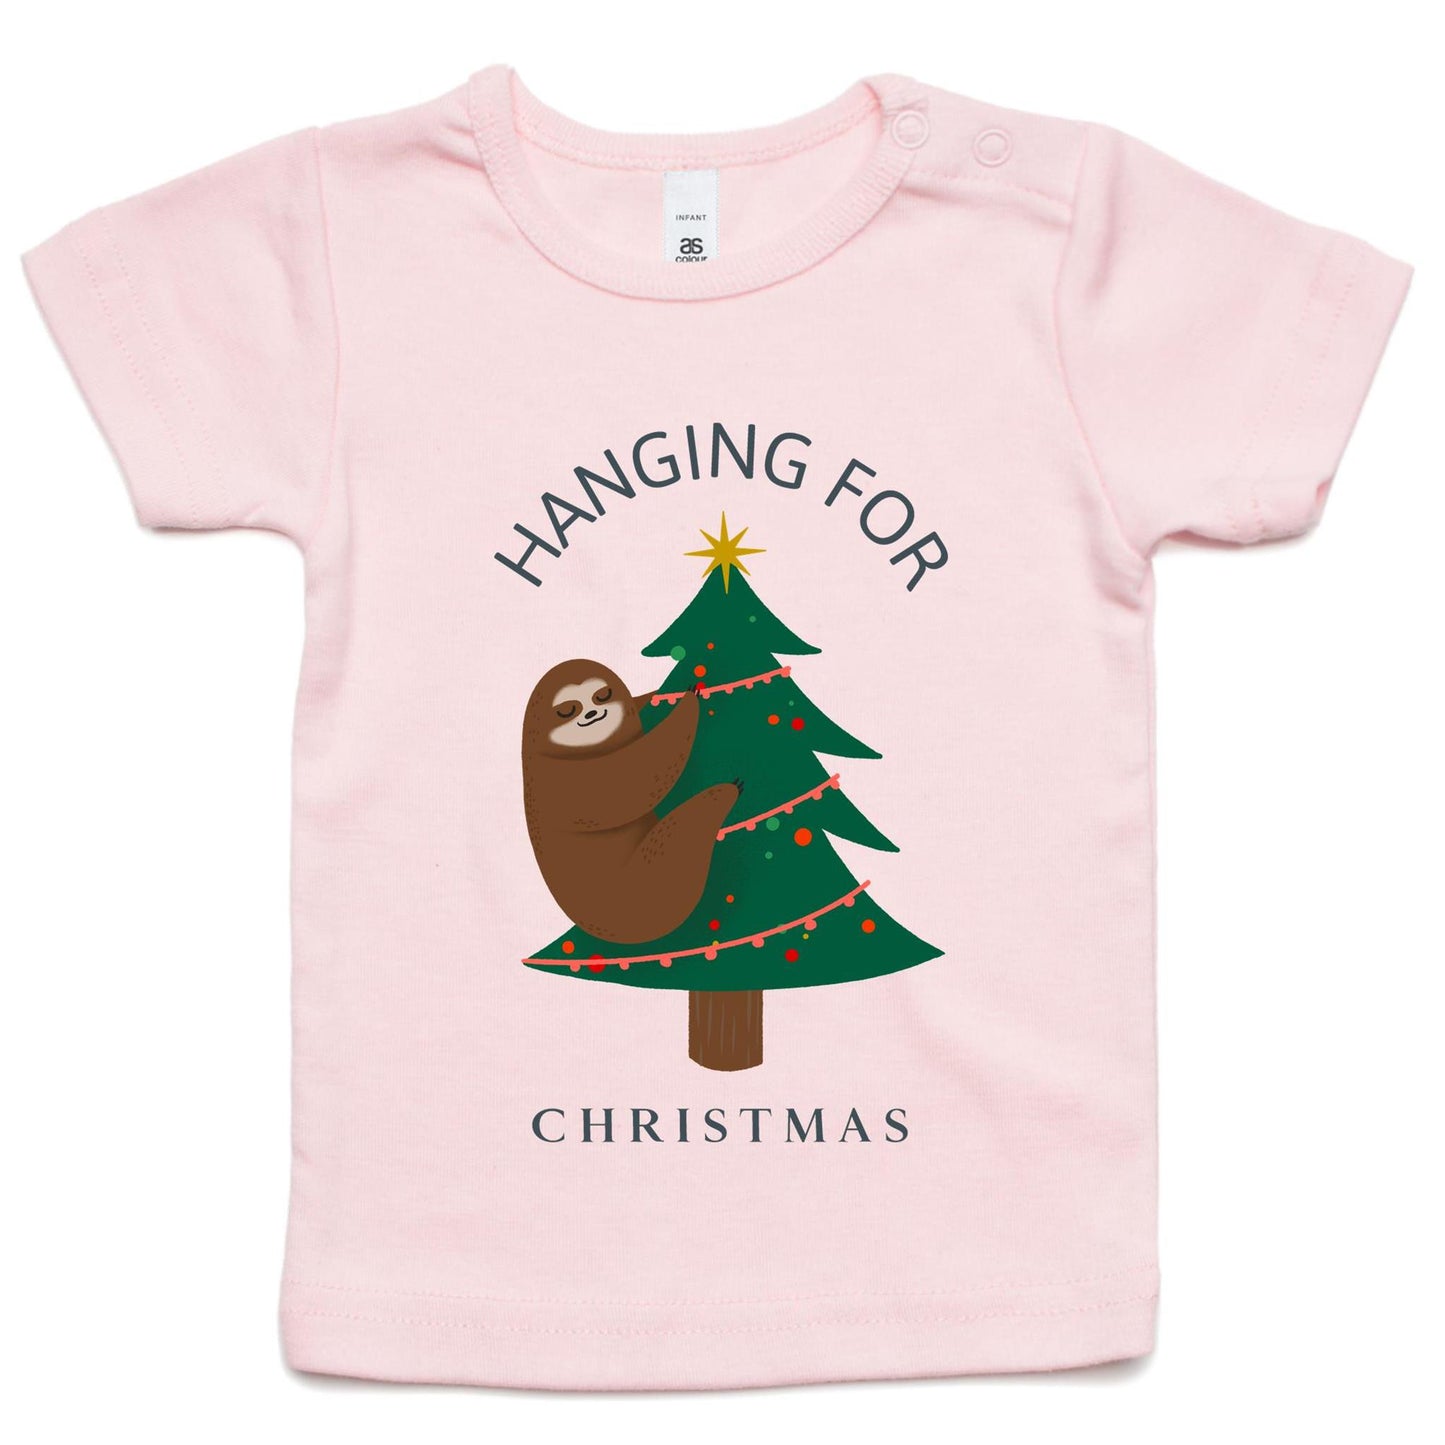 Hanging For Christmas - Baby T-shirt Pink Christmas Baby T-shirt Merry Christmas